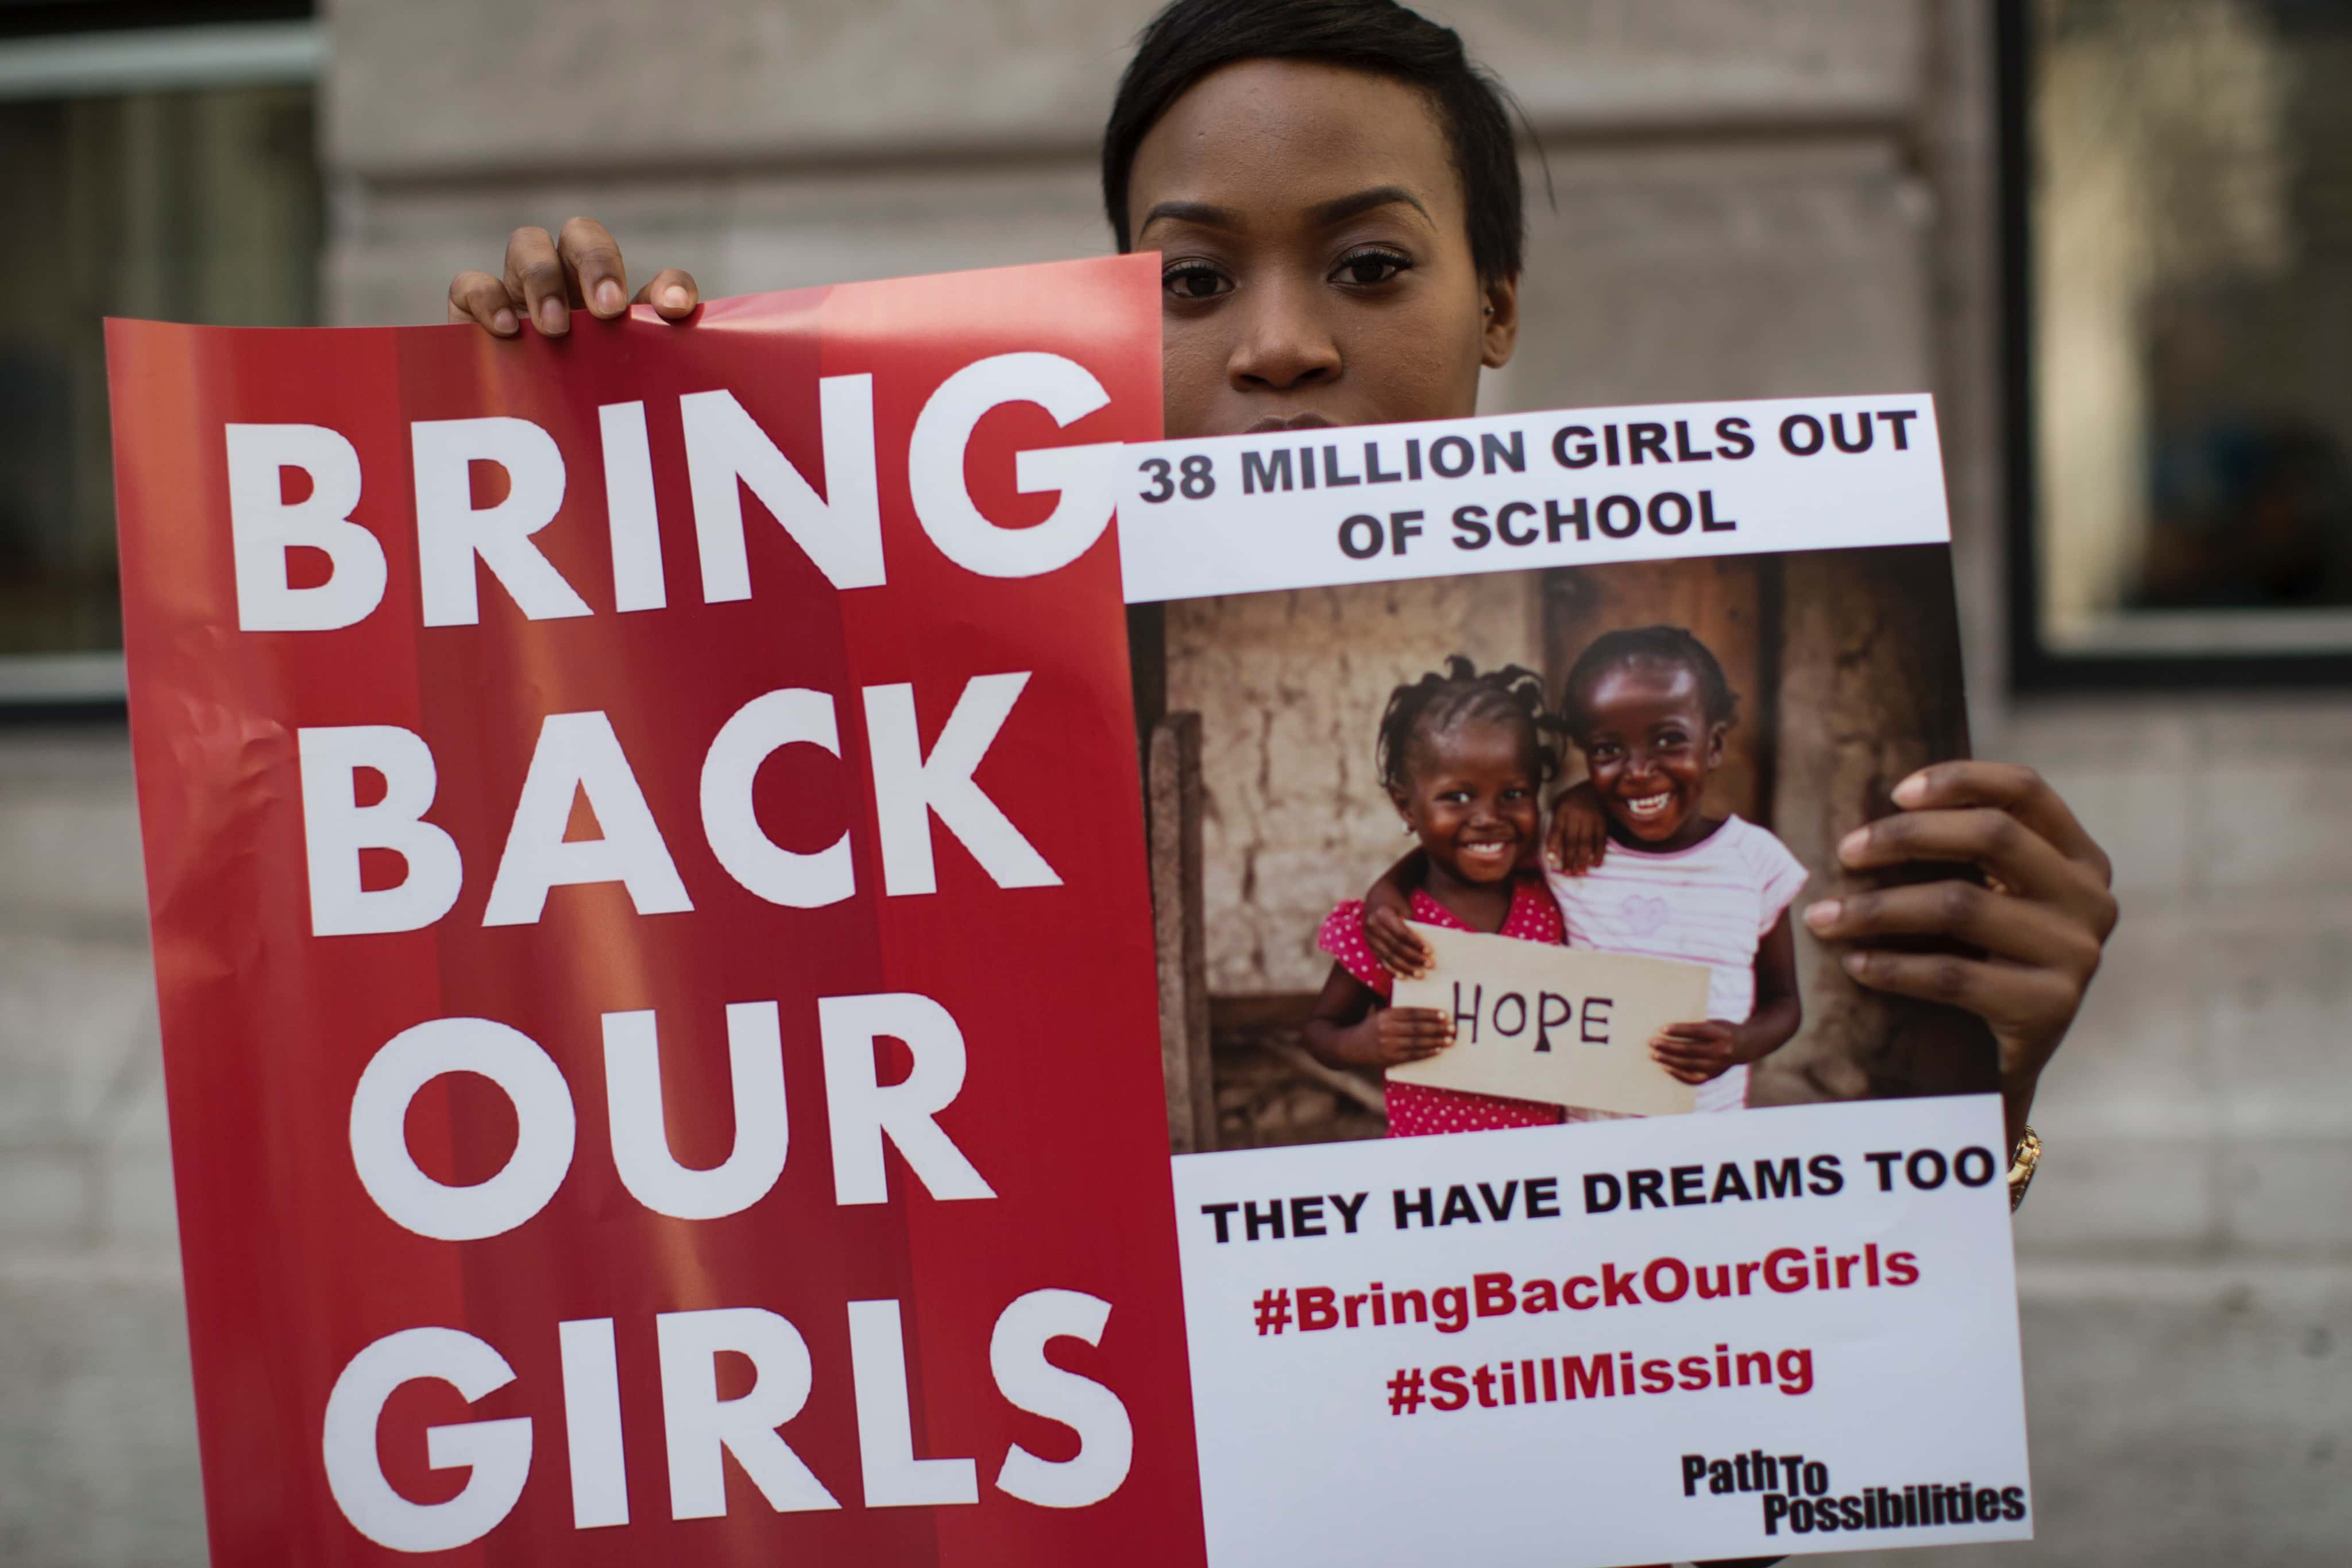 At Least 287 Nigerian Students Abducted From School by Gunmen